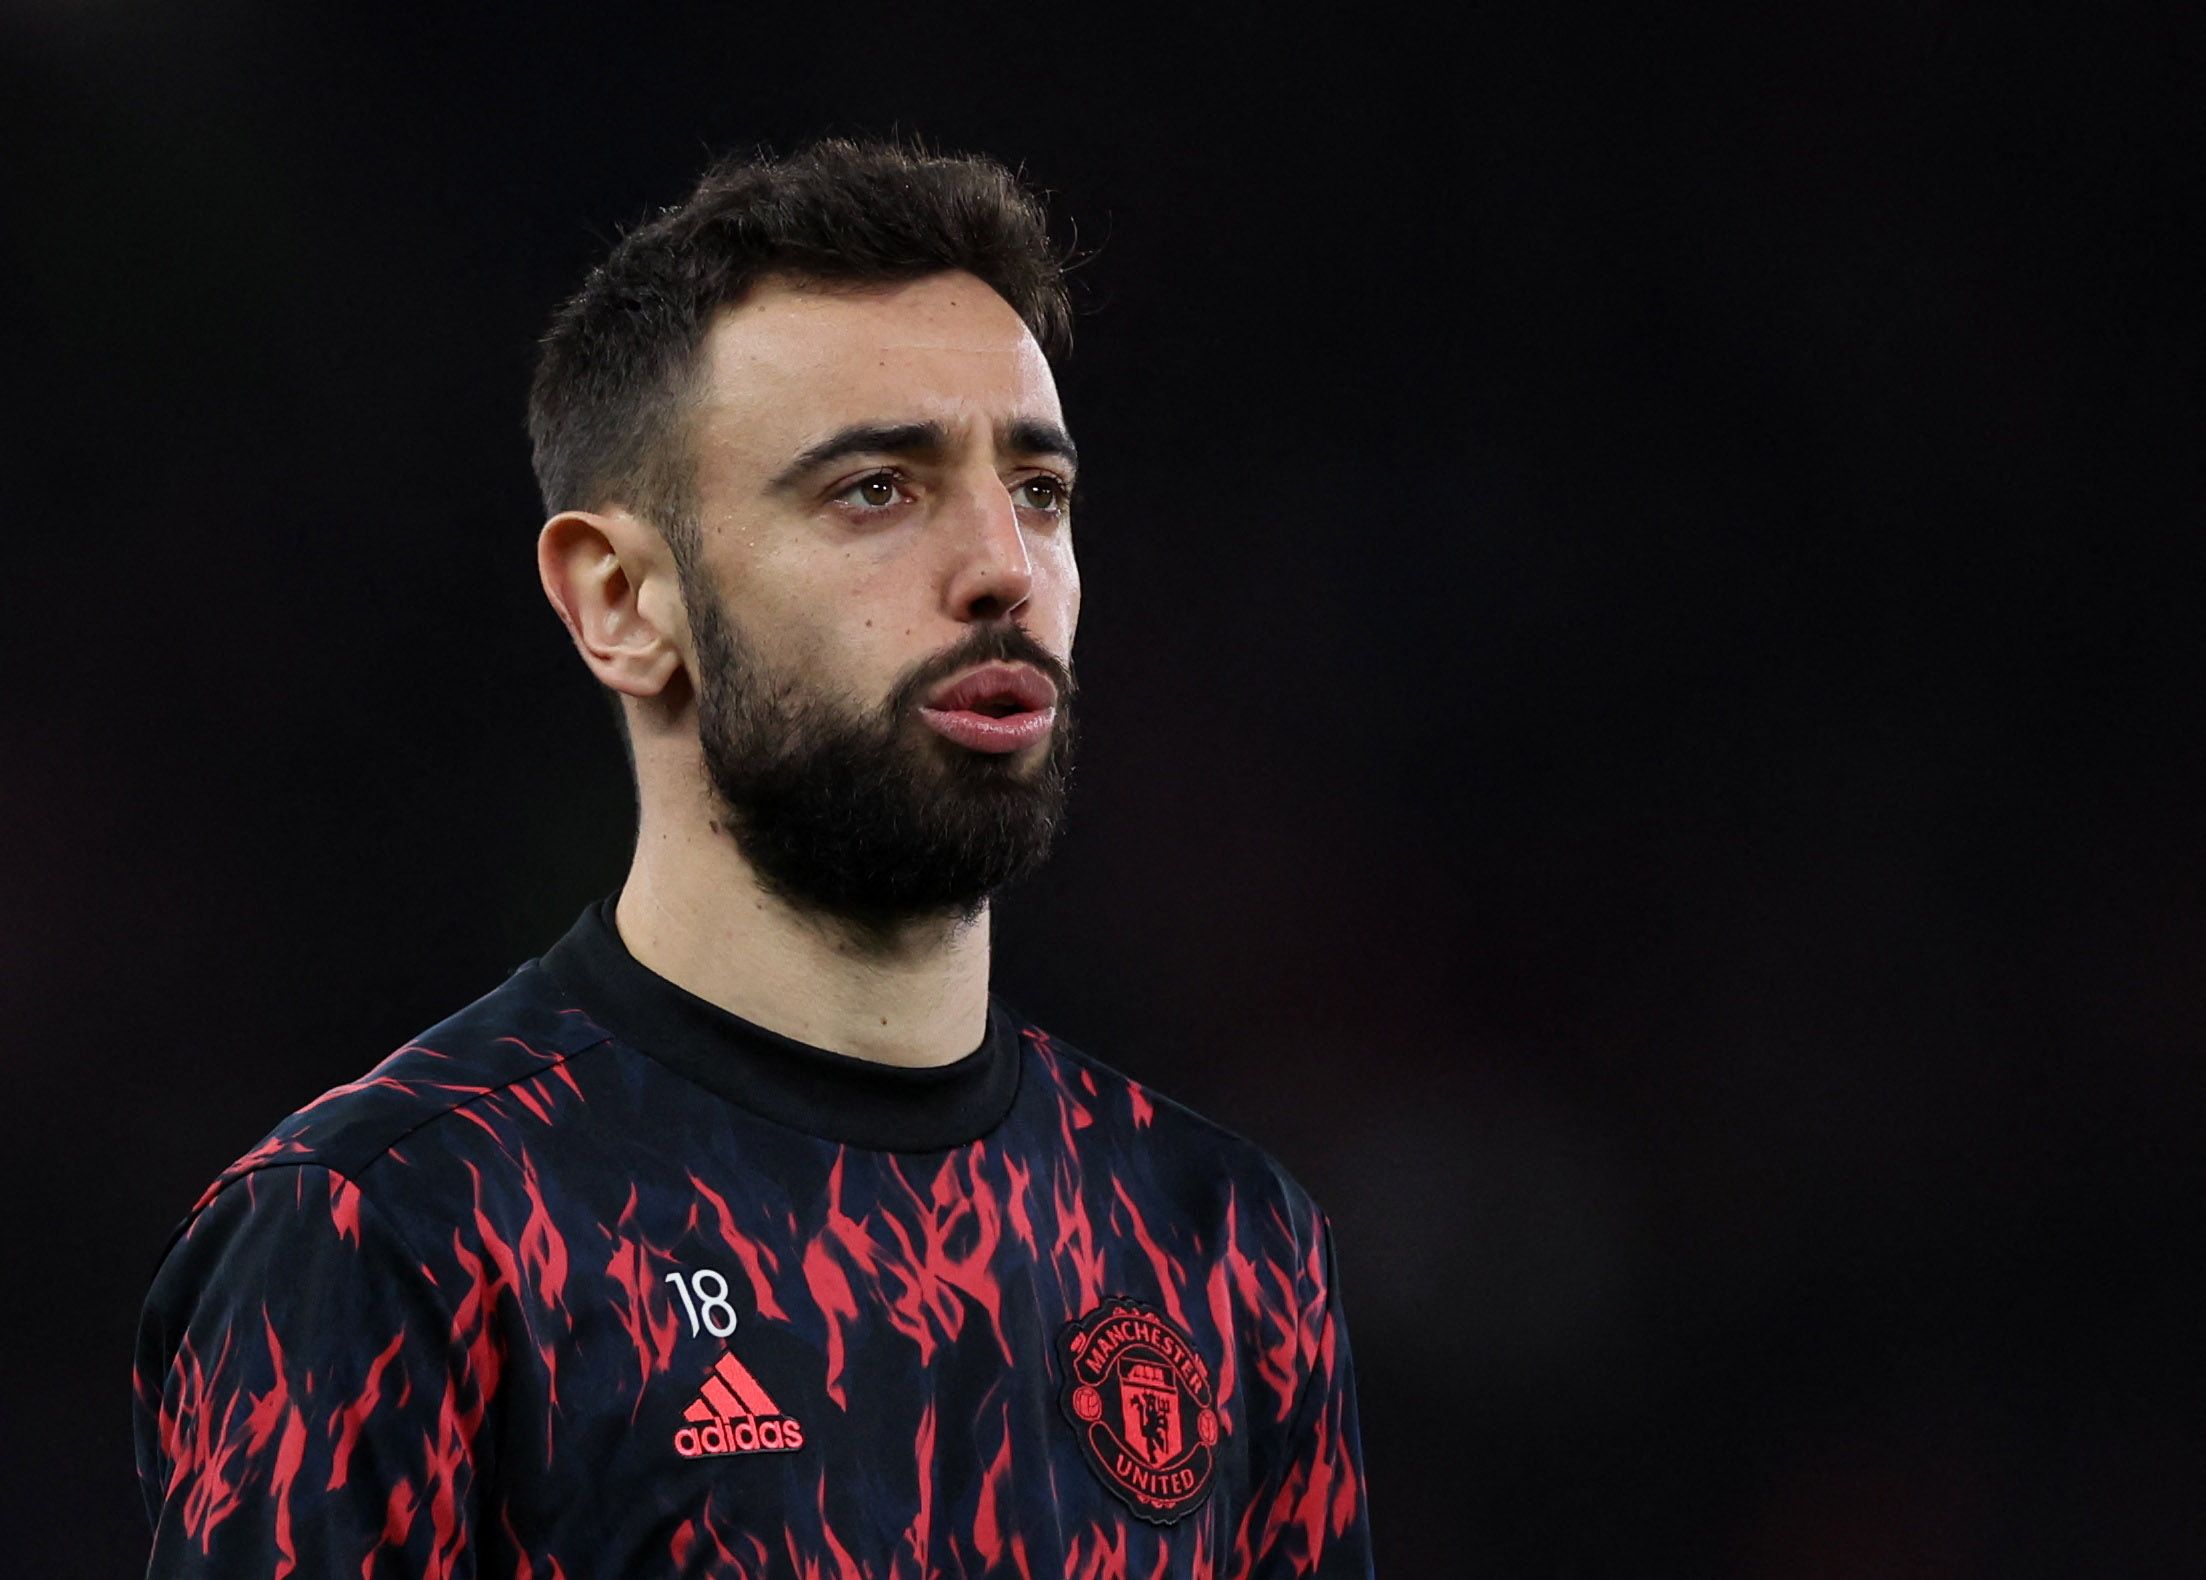 Soccer Football - Champions League - Round of 16 Second Leg - Manchester United v Atletico Madrid - Old Trafford, Manchester, Britain - March 15, 2022 Manchester United's Bruno Fernandes during the warm up before the match REUTERS/Phil Noble